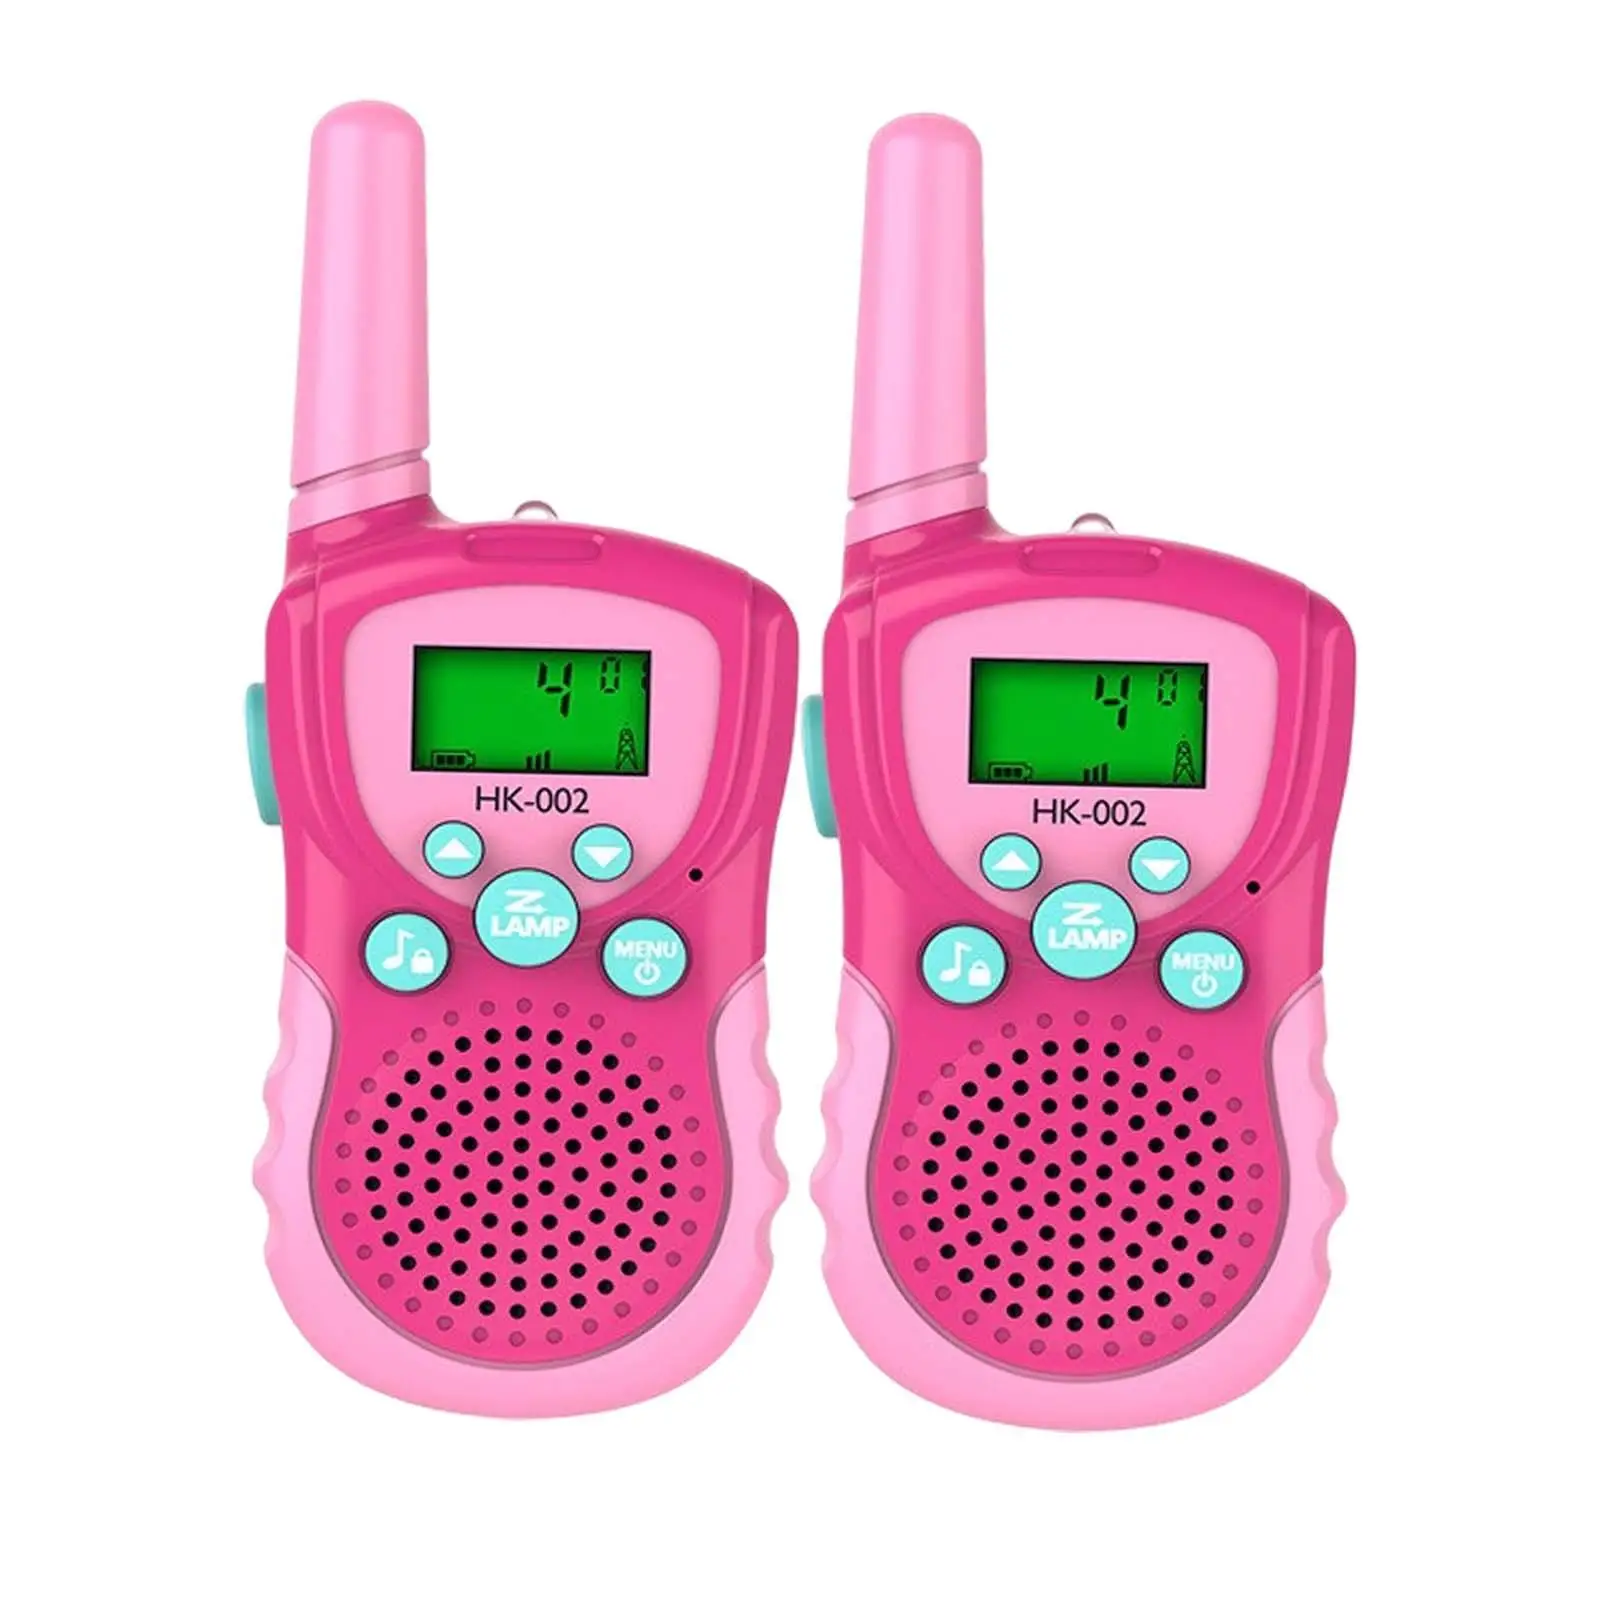 2x Children Walkie Talkie with Belt Clip 2km Range Birthday Gift Walky Talky Toy for Games 3-14 Years Old Outdoor Camping Hiking